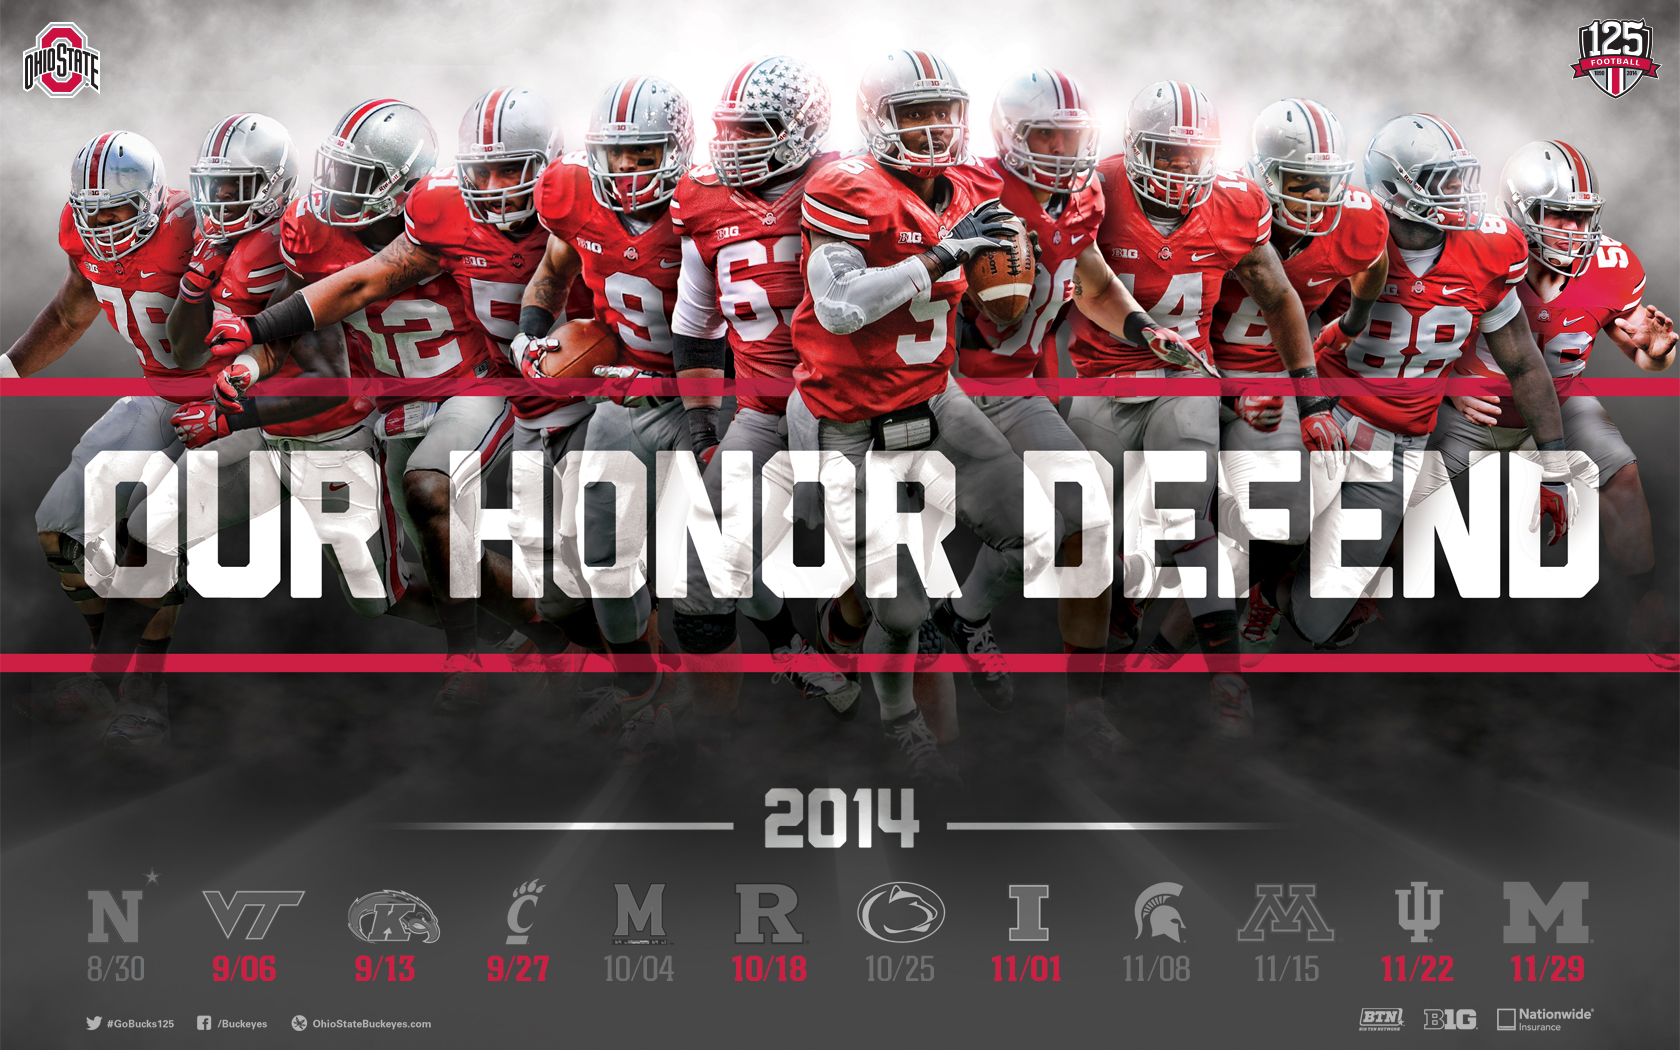 Download The Ohio State Football 2014 Schedule Poster for Printing and